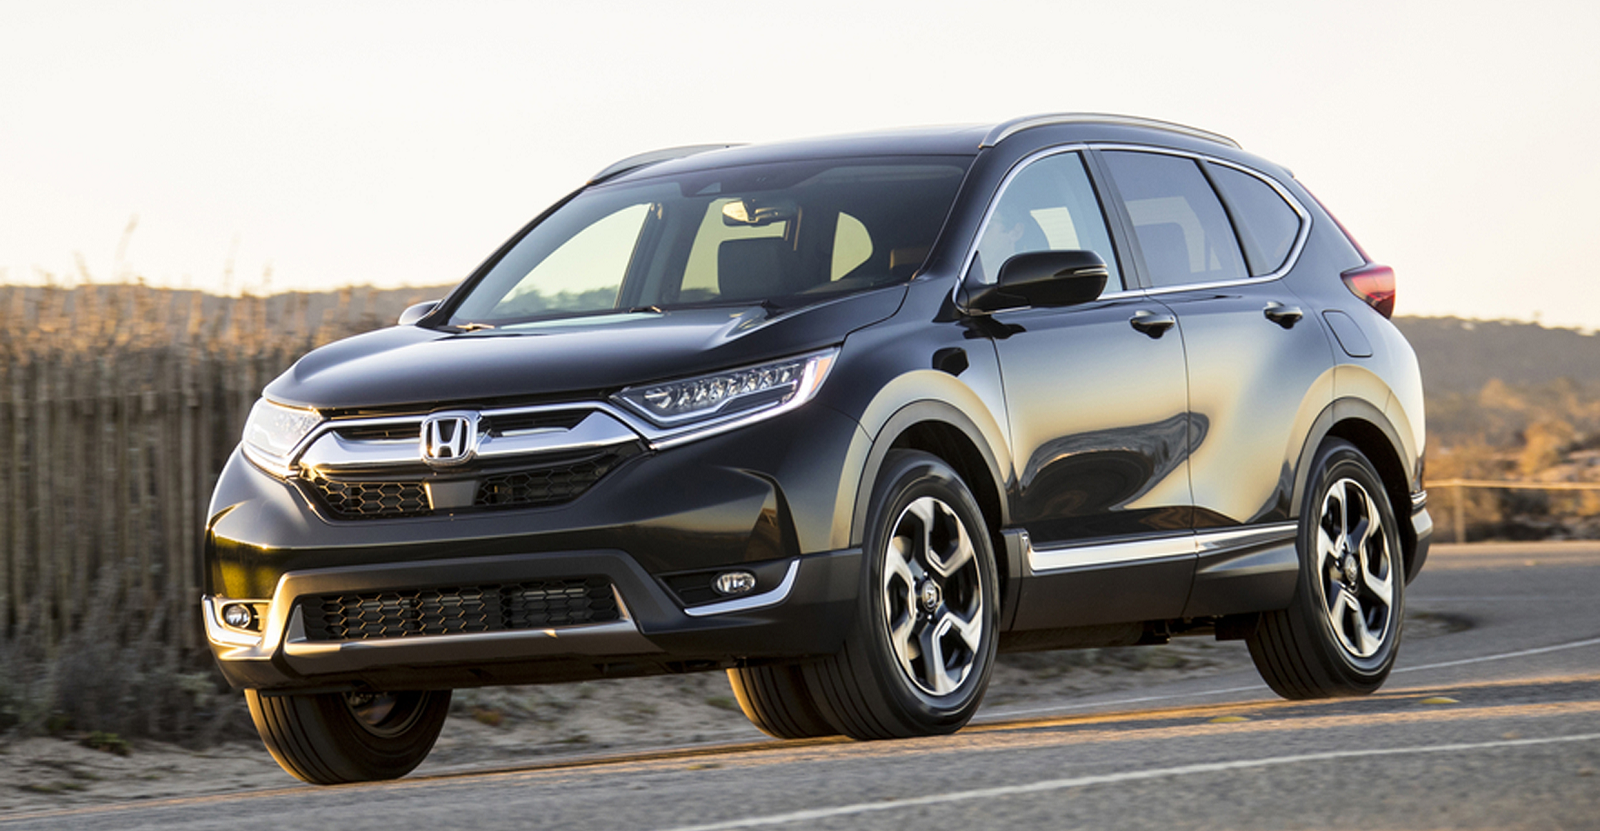 2019 Honda CR-V: What Makes the Leading Compact SUV Special?